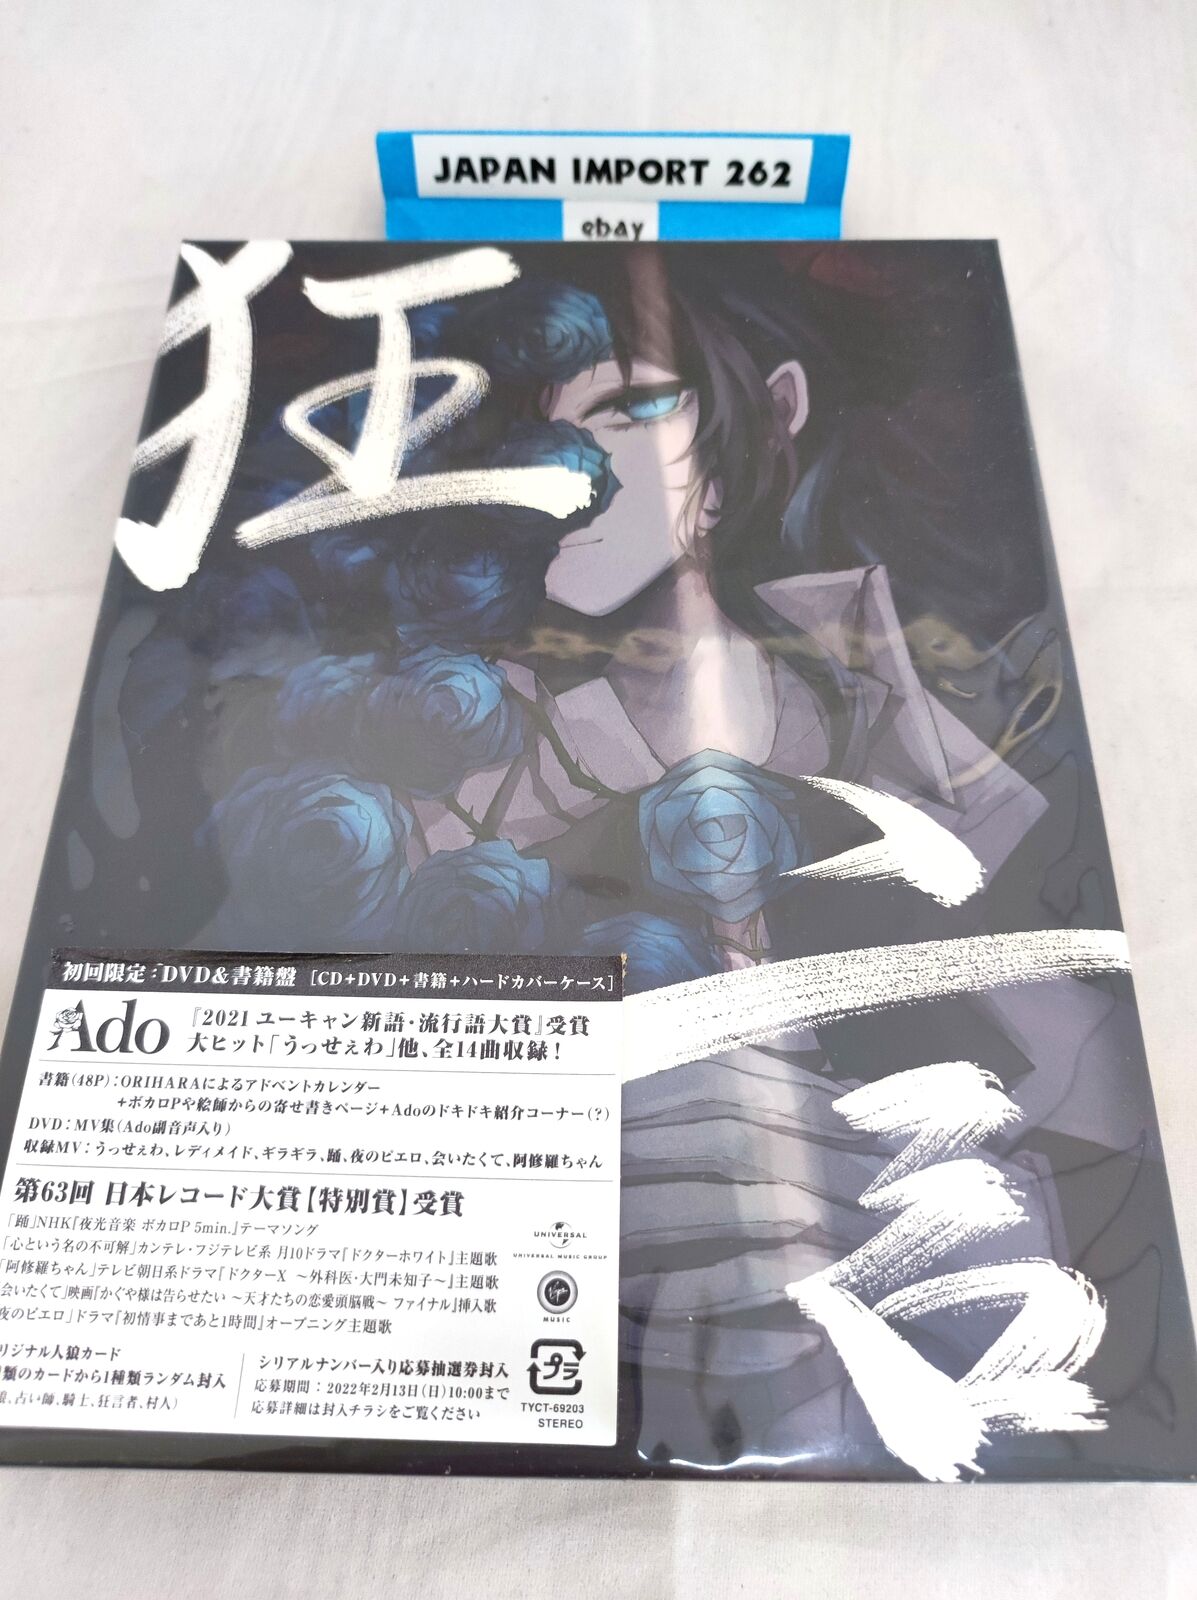 Ado Kyogen CD (first press limited edition) (with DVD + book) from Japan